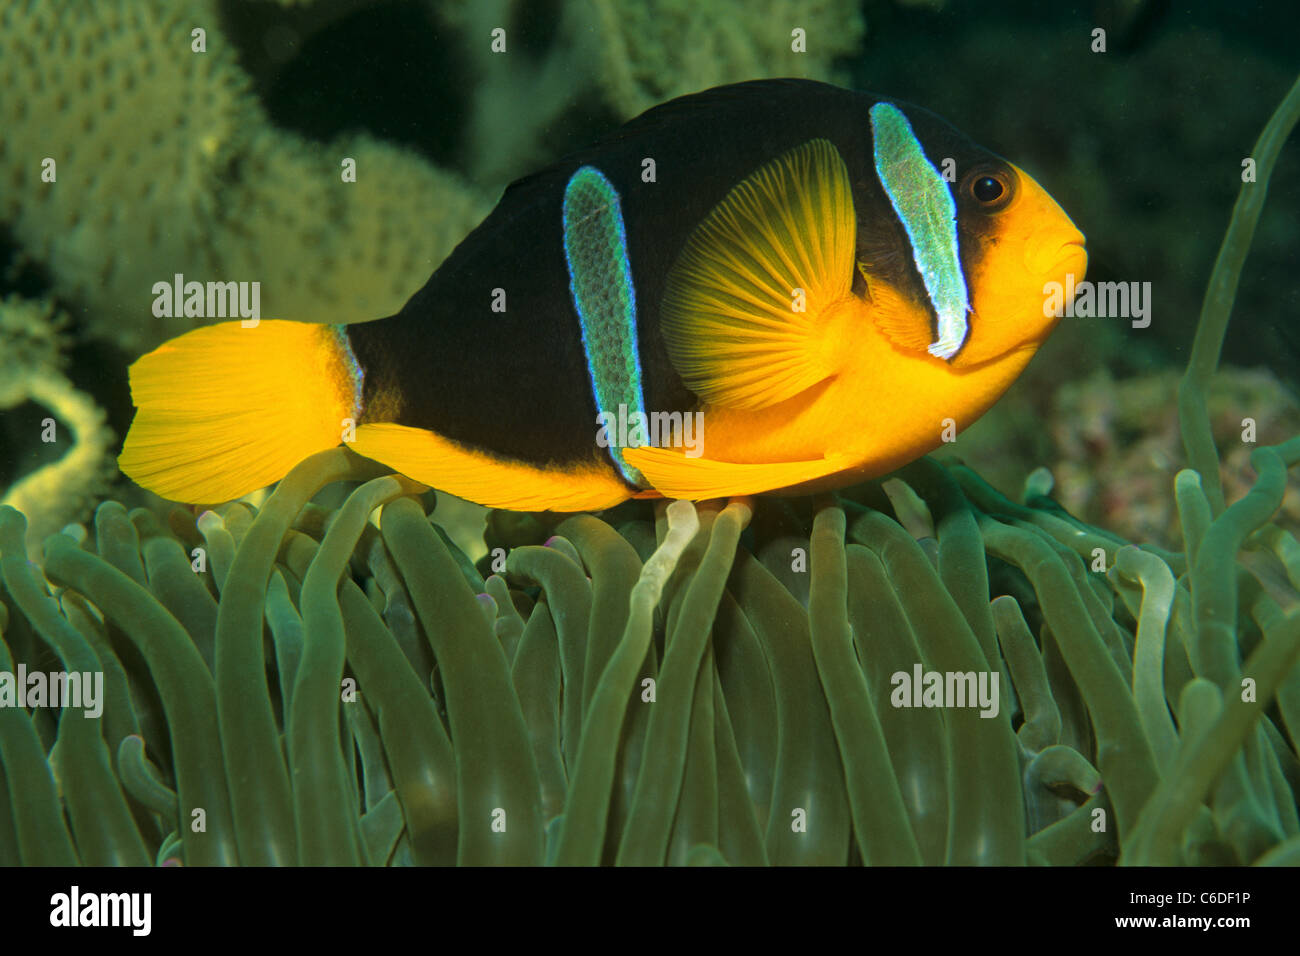 Anemonenfisch, Amphiprion sp., Anemonefish, Amphiprion sp., Stock Photo